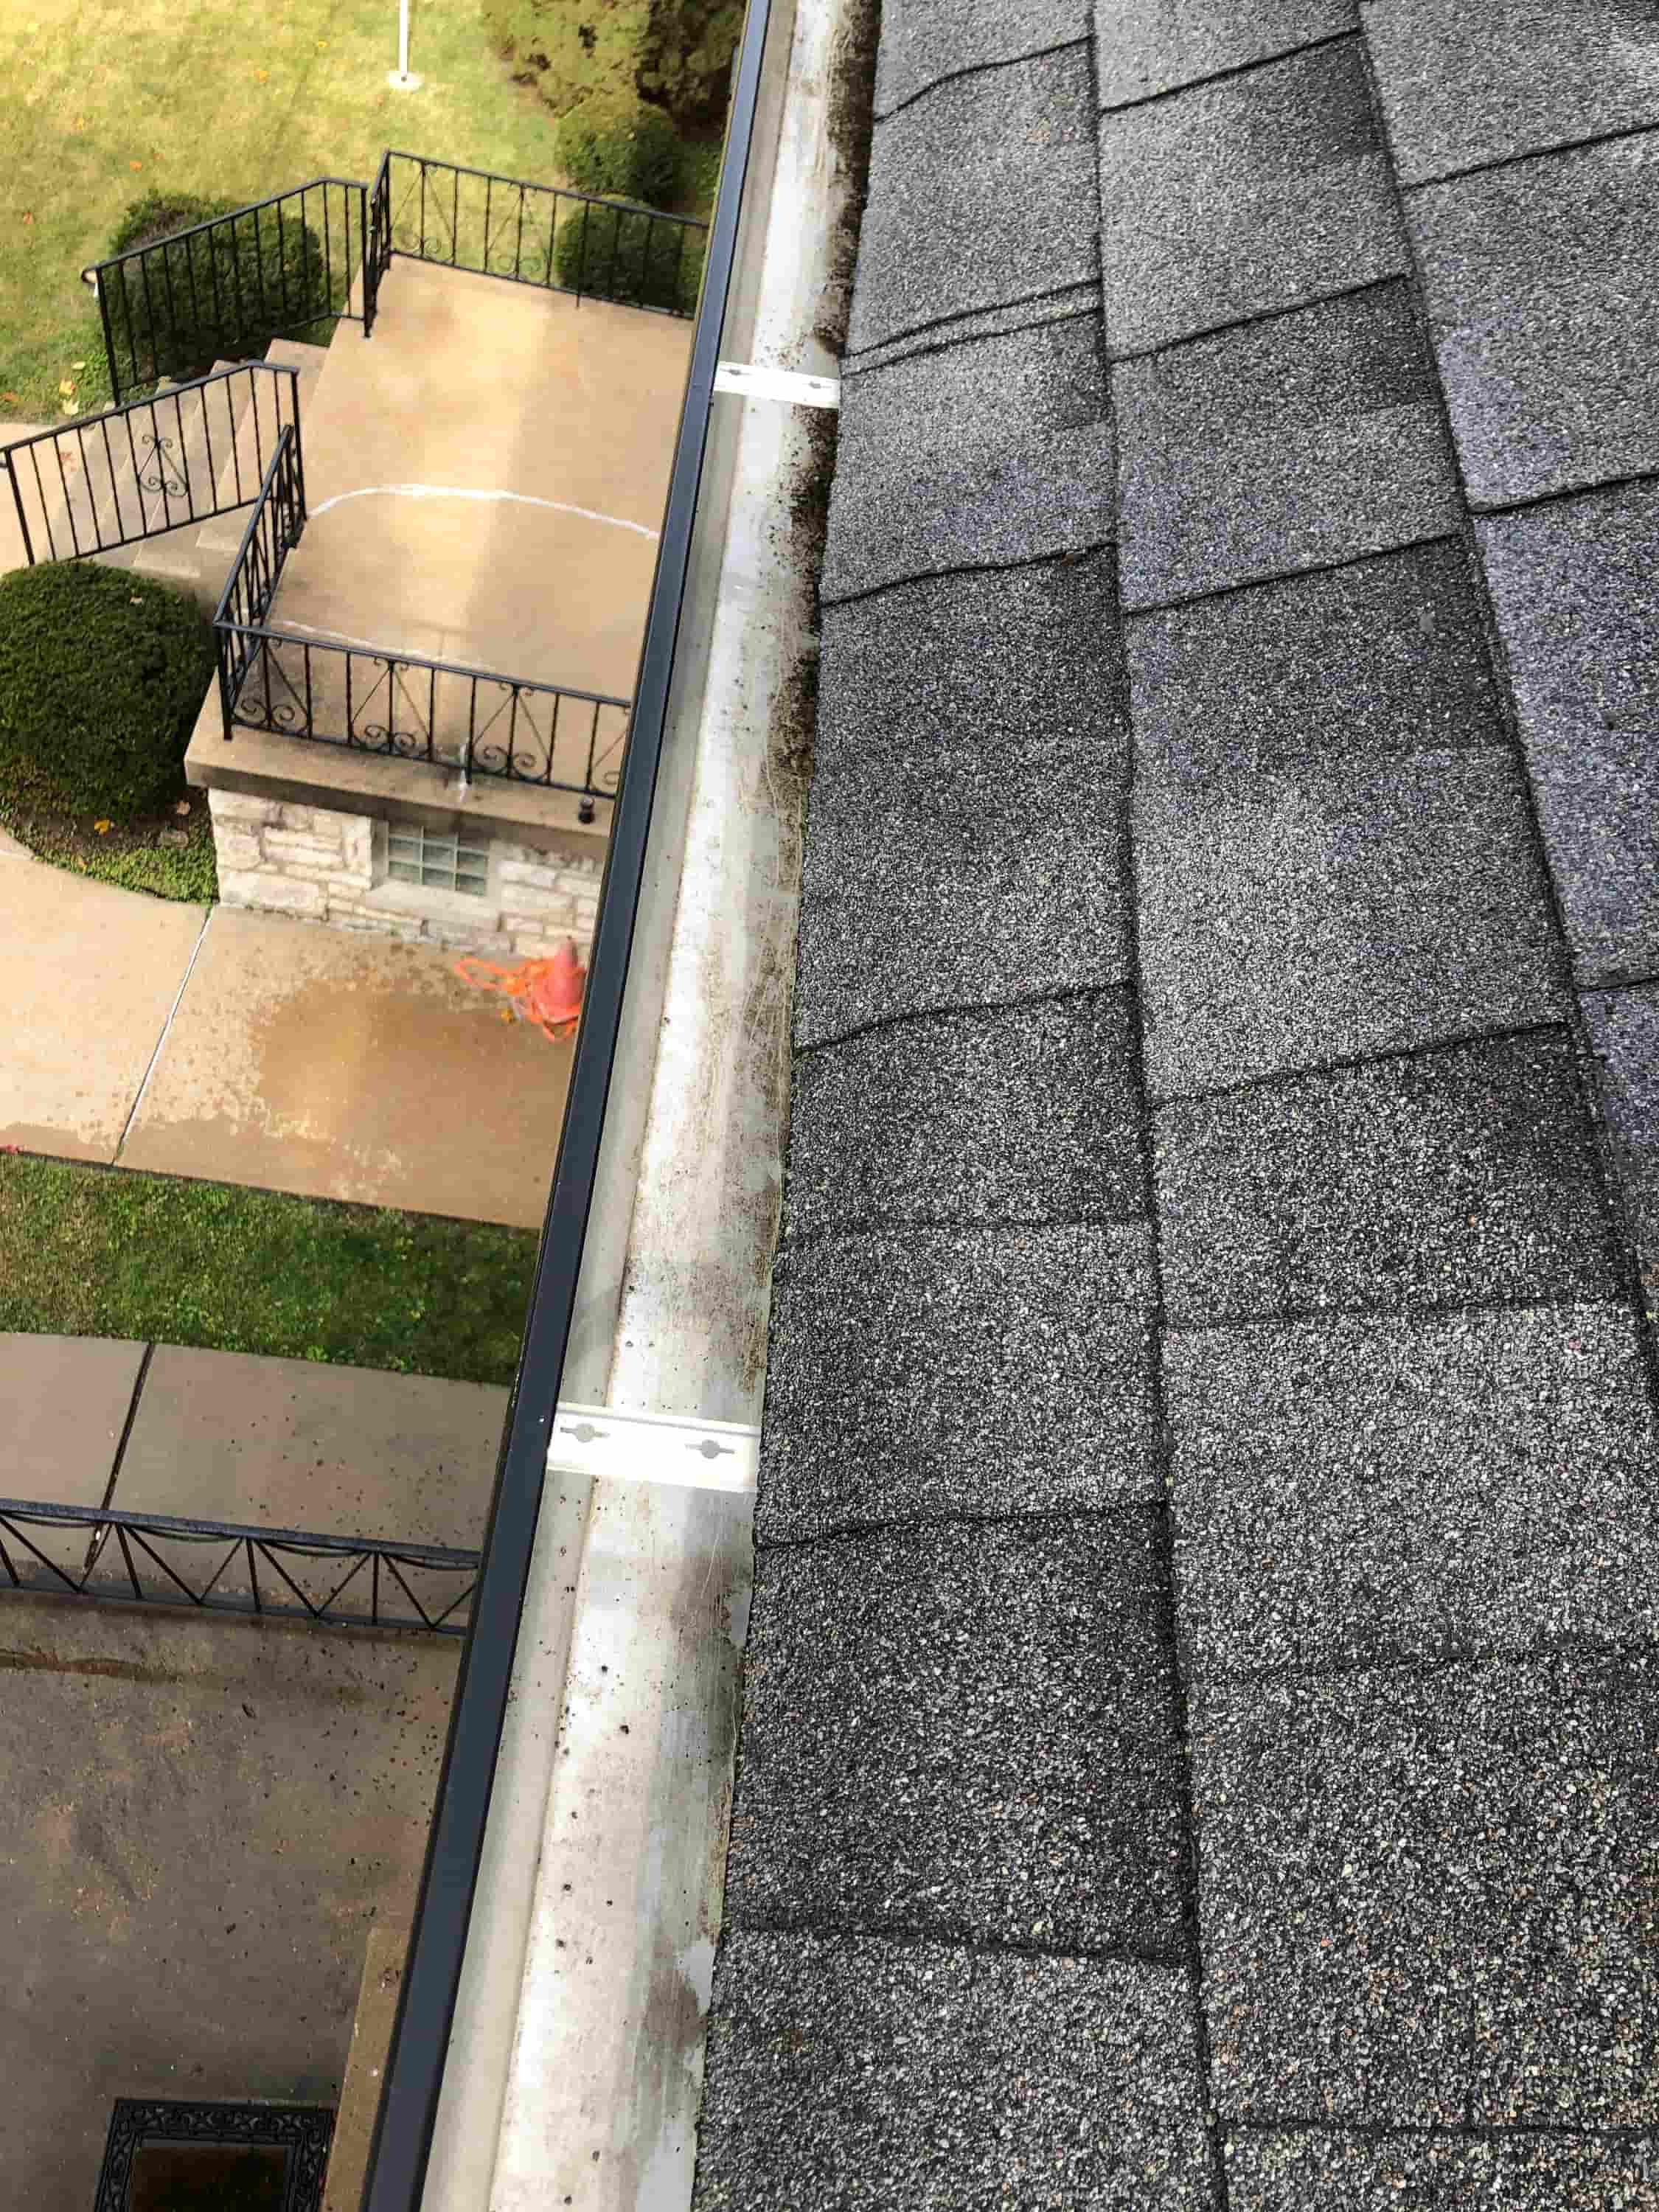 local gutter cleaning companies